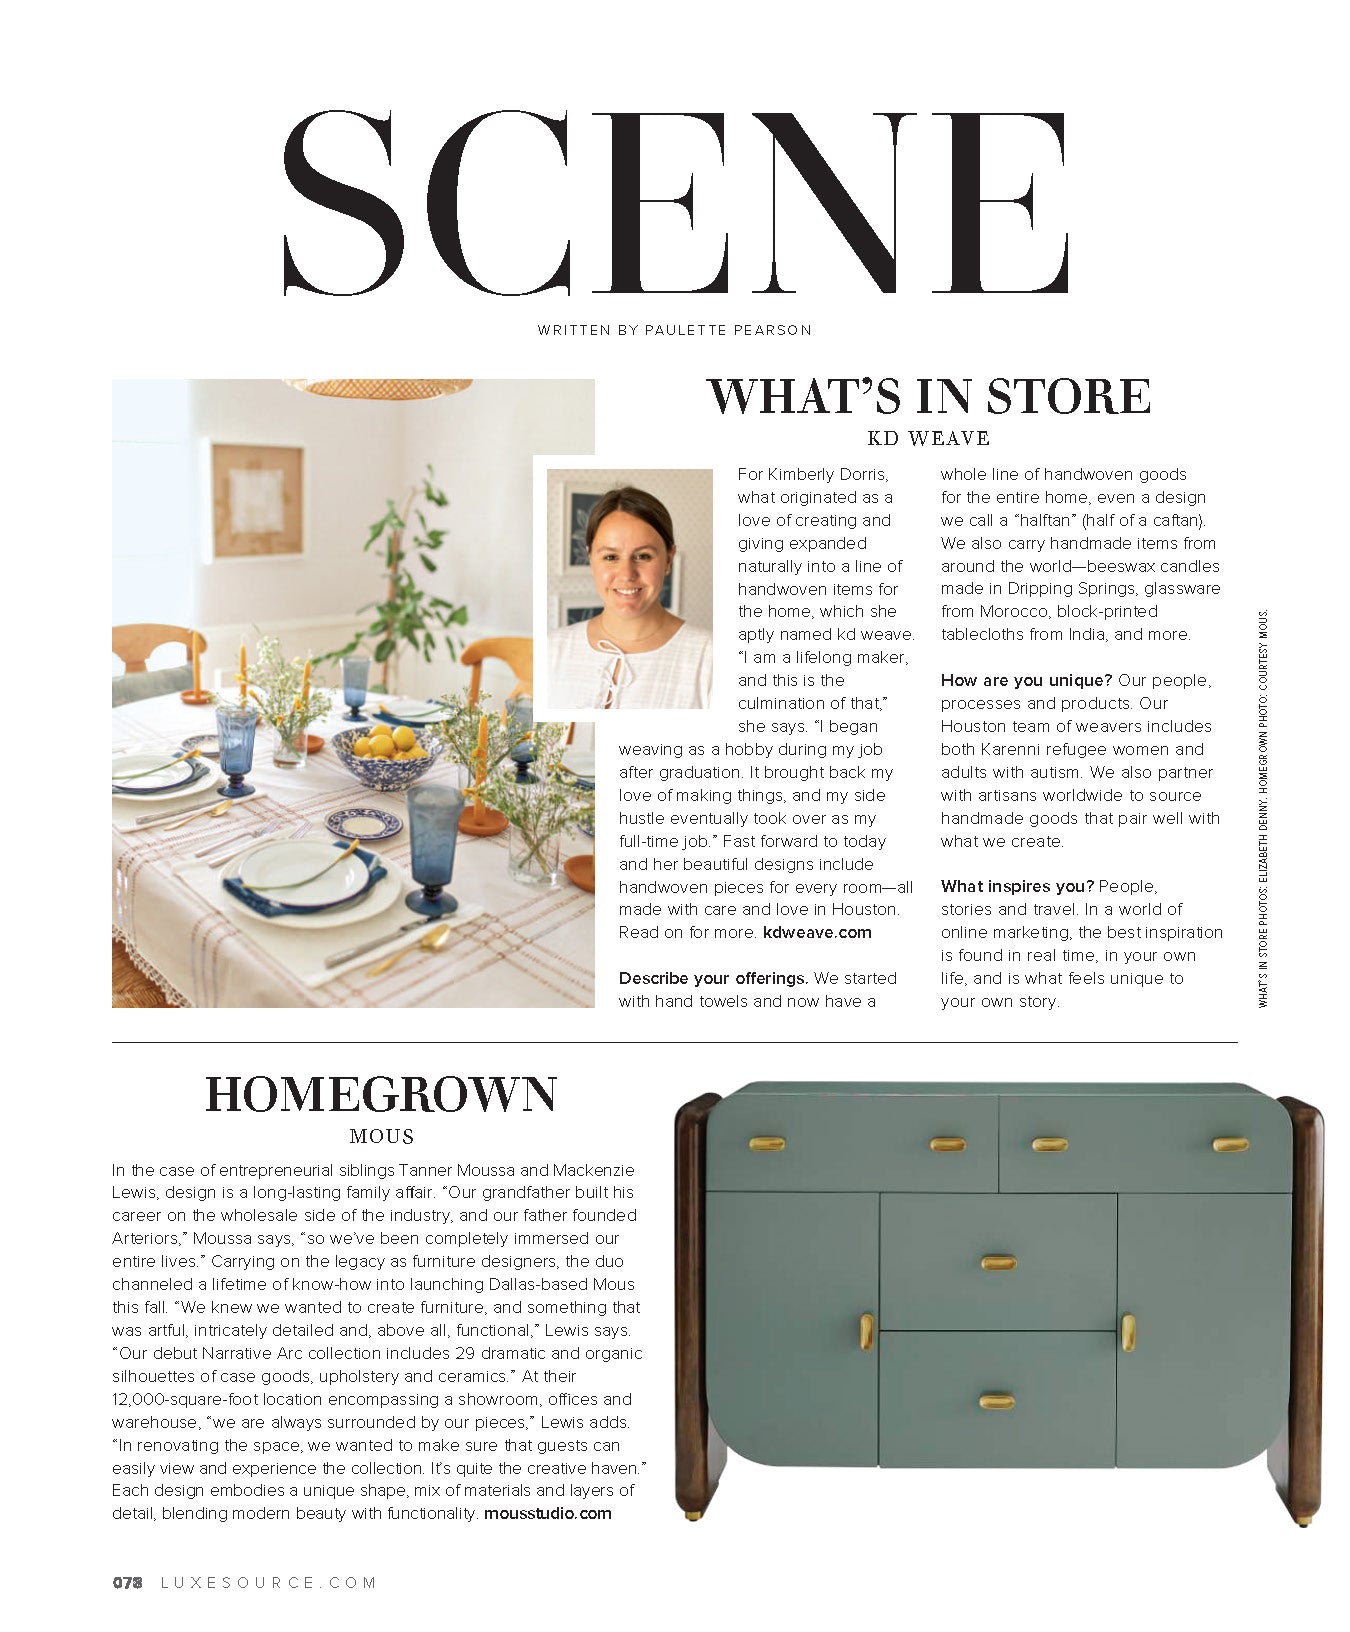 Homegrown - Mouse featured in LUXE Interiors + Design